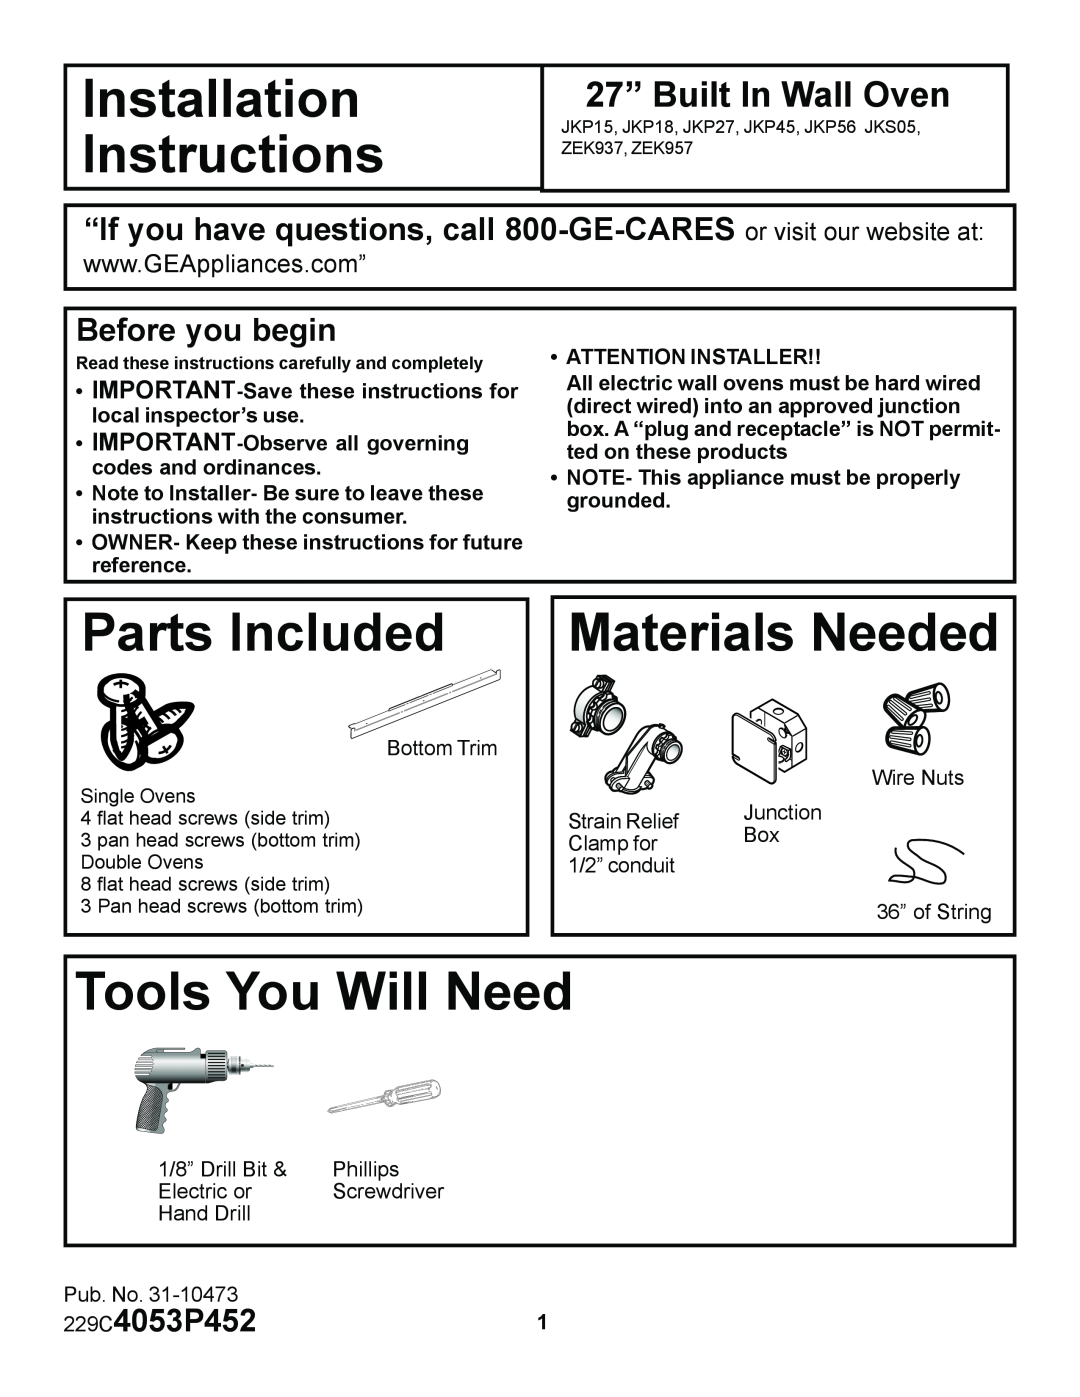 GE ZEK957 installation instructions Installation Instructions, Parts Included, Materials Needed, Tools You Will Need 